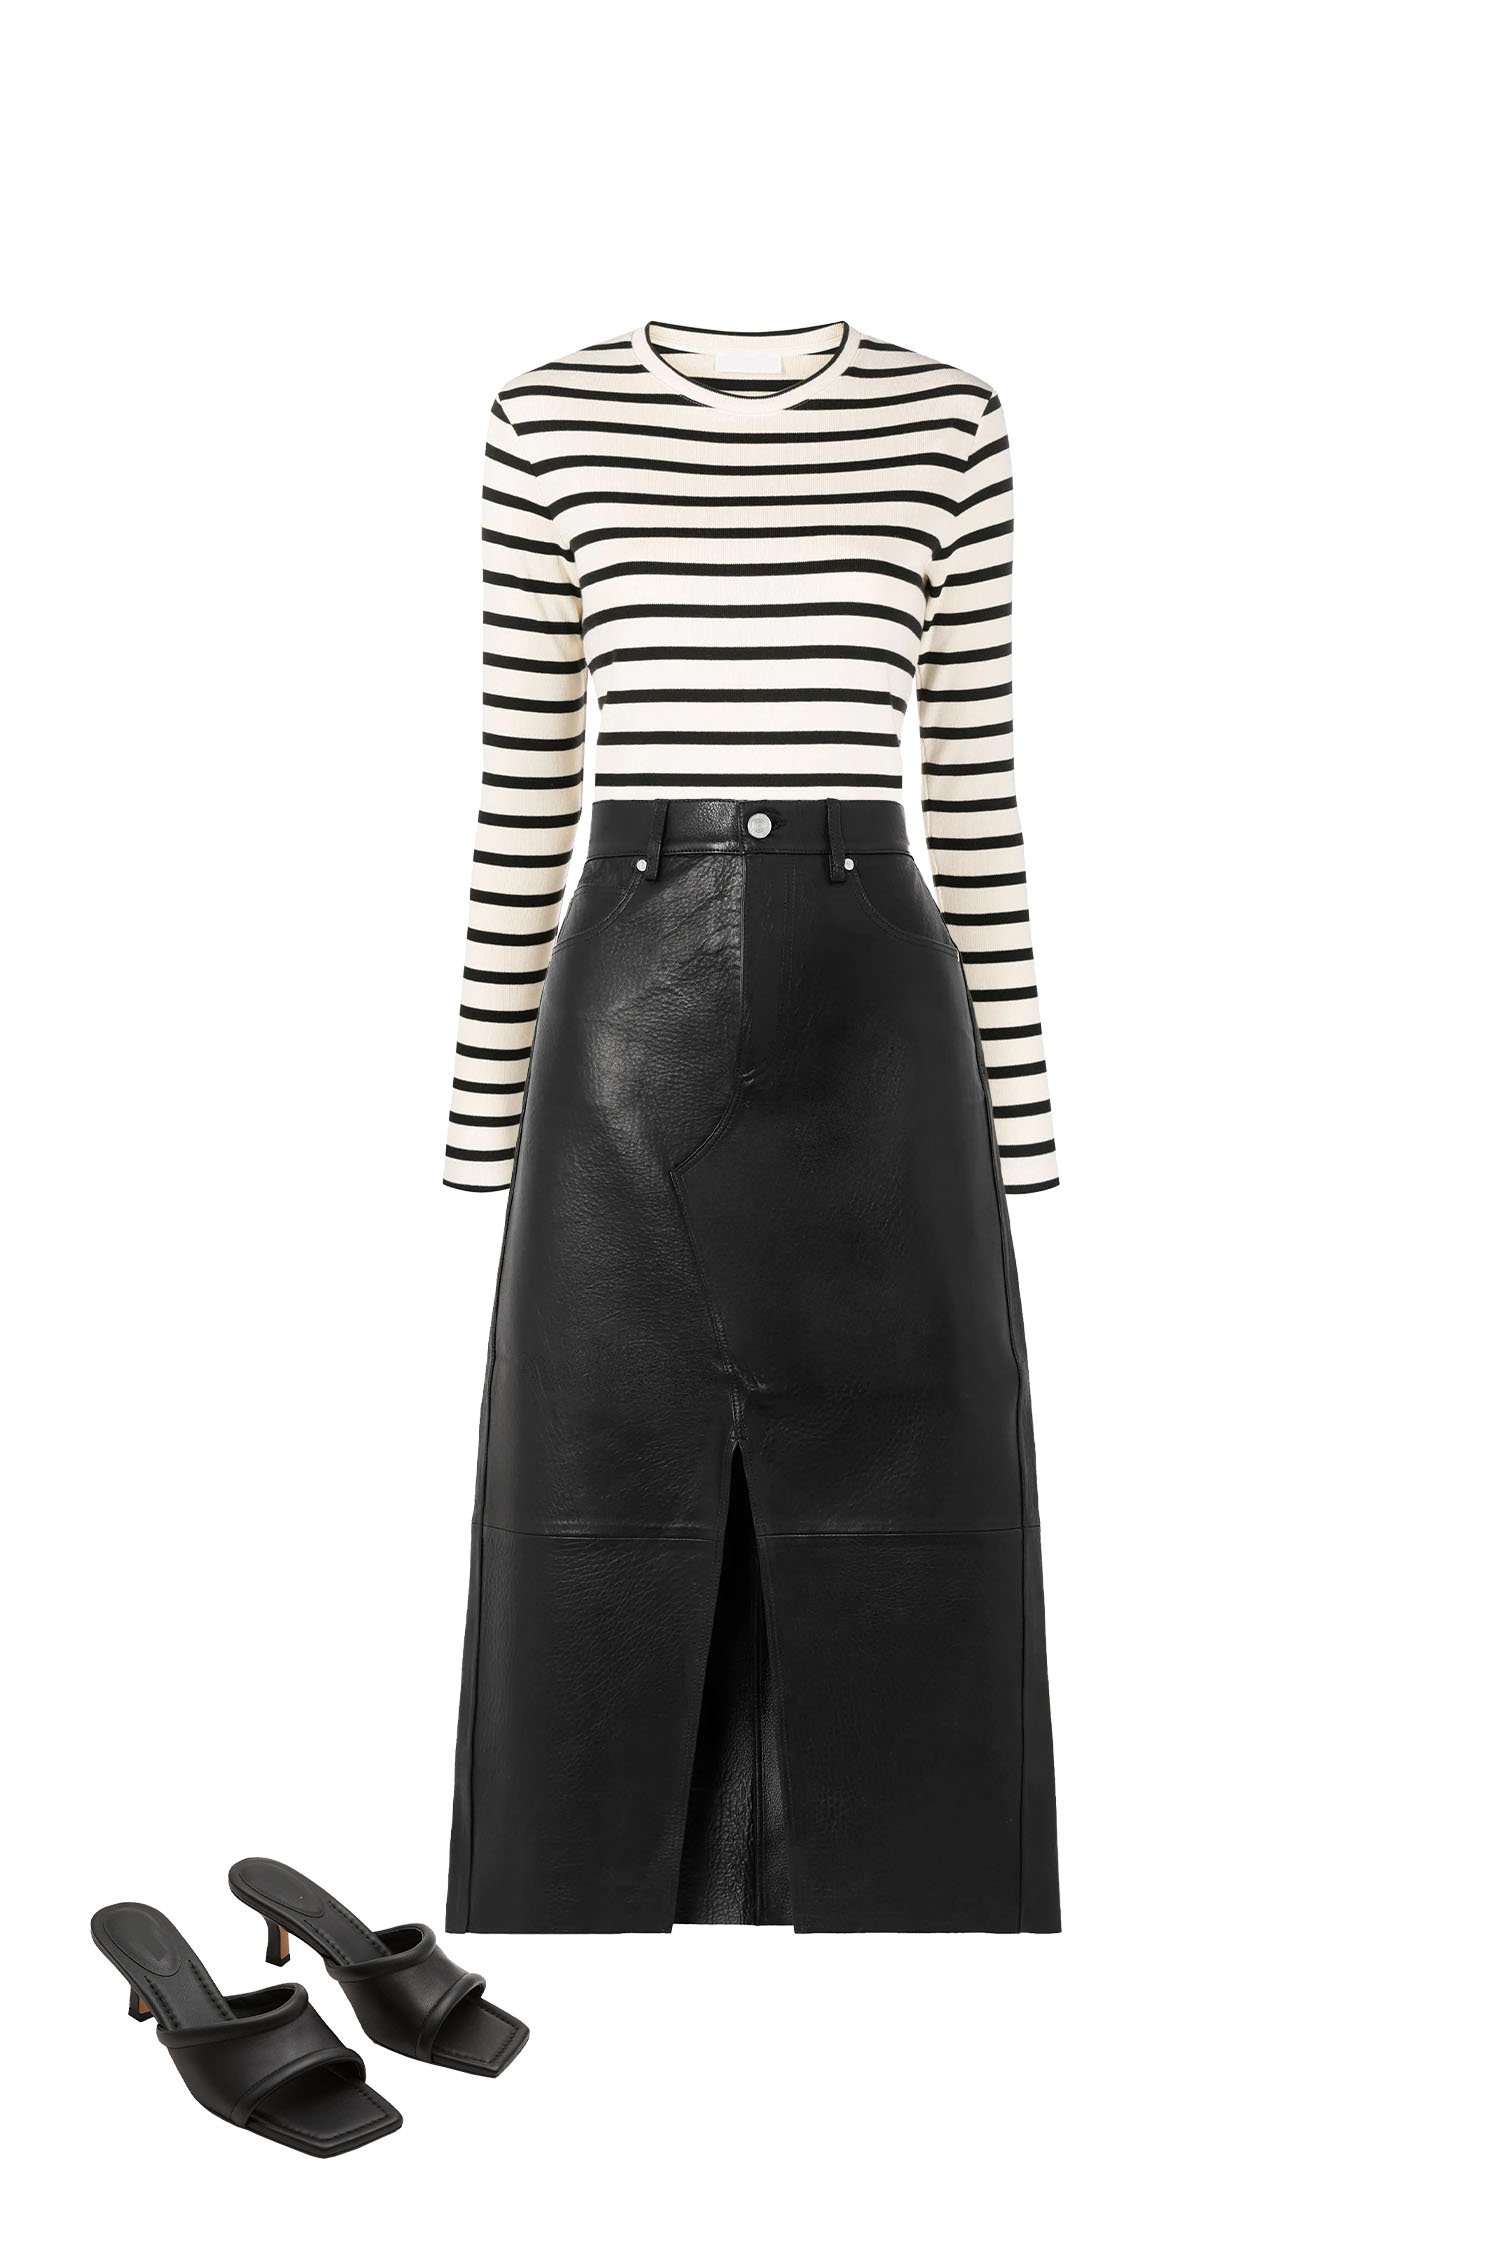 Black Leather Midi Skirt Outfit with Cream and Black Stripe T-shirt and Black Square Toe Kitten Heel Sandals